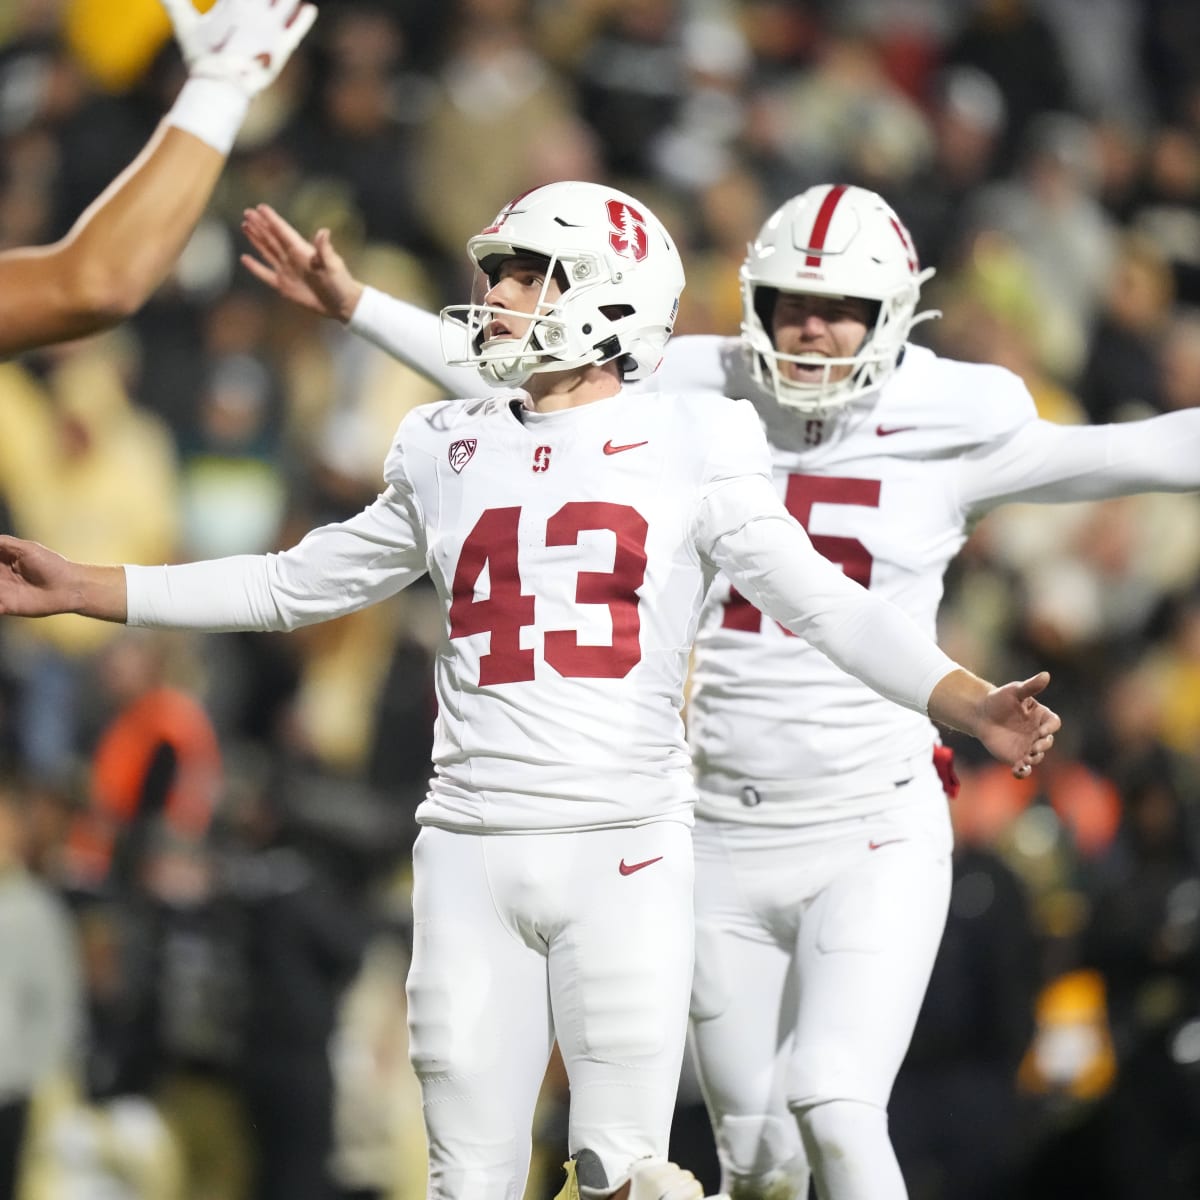 Chess.com on X: BlitzChamps is headed to Stanford! 🌲🏈 Initiated by  Senior Kicker @JoshuaKarty, Stanford University's football team will be  facing off head-to-head on the chessboard! The 8 man bracket starts tomorrow